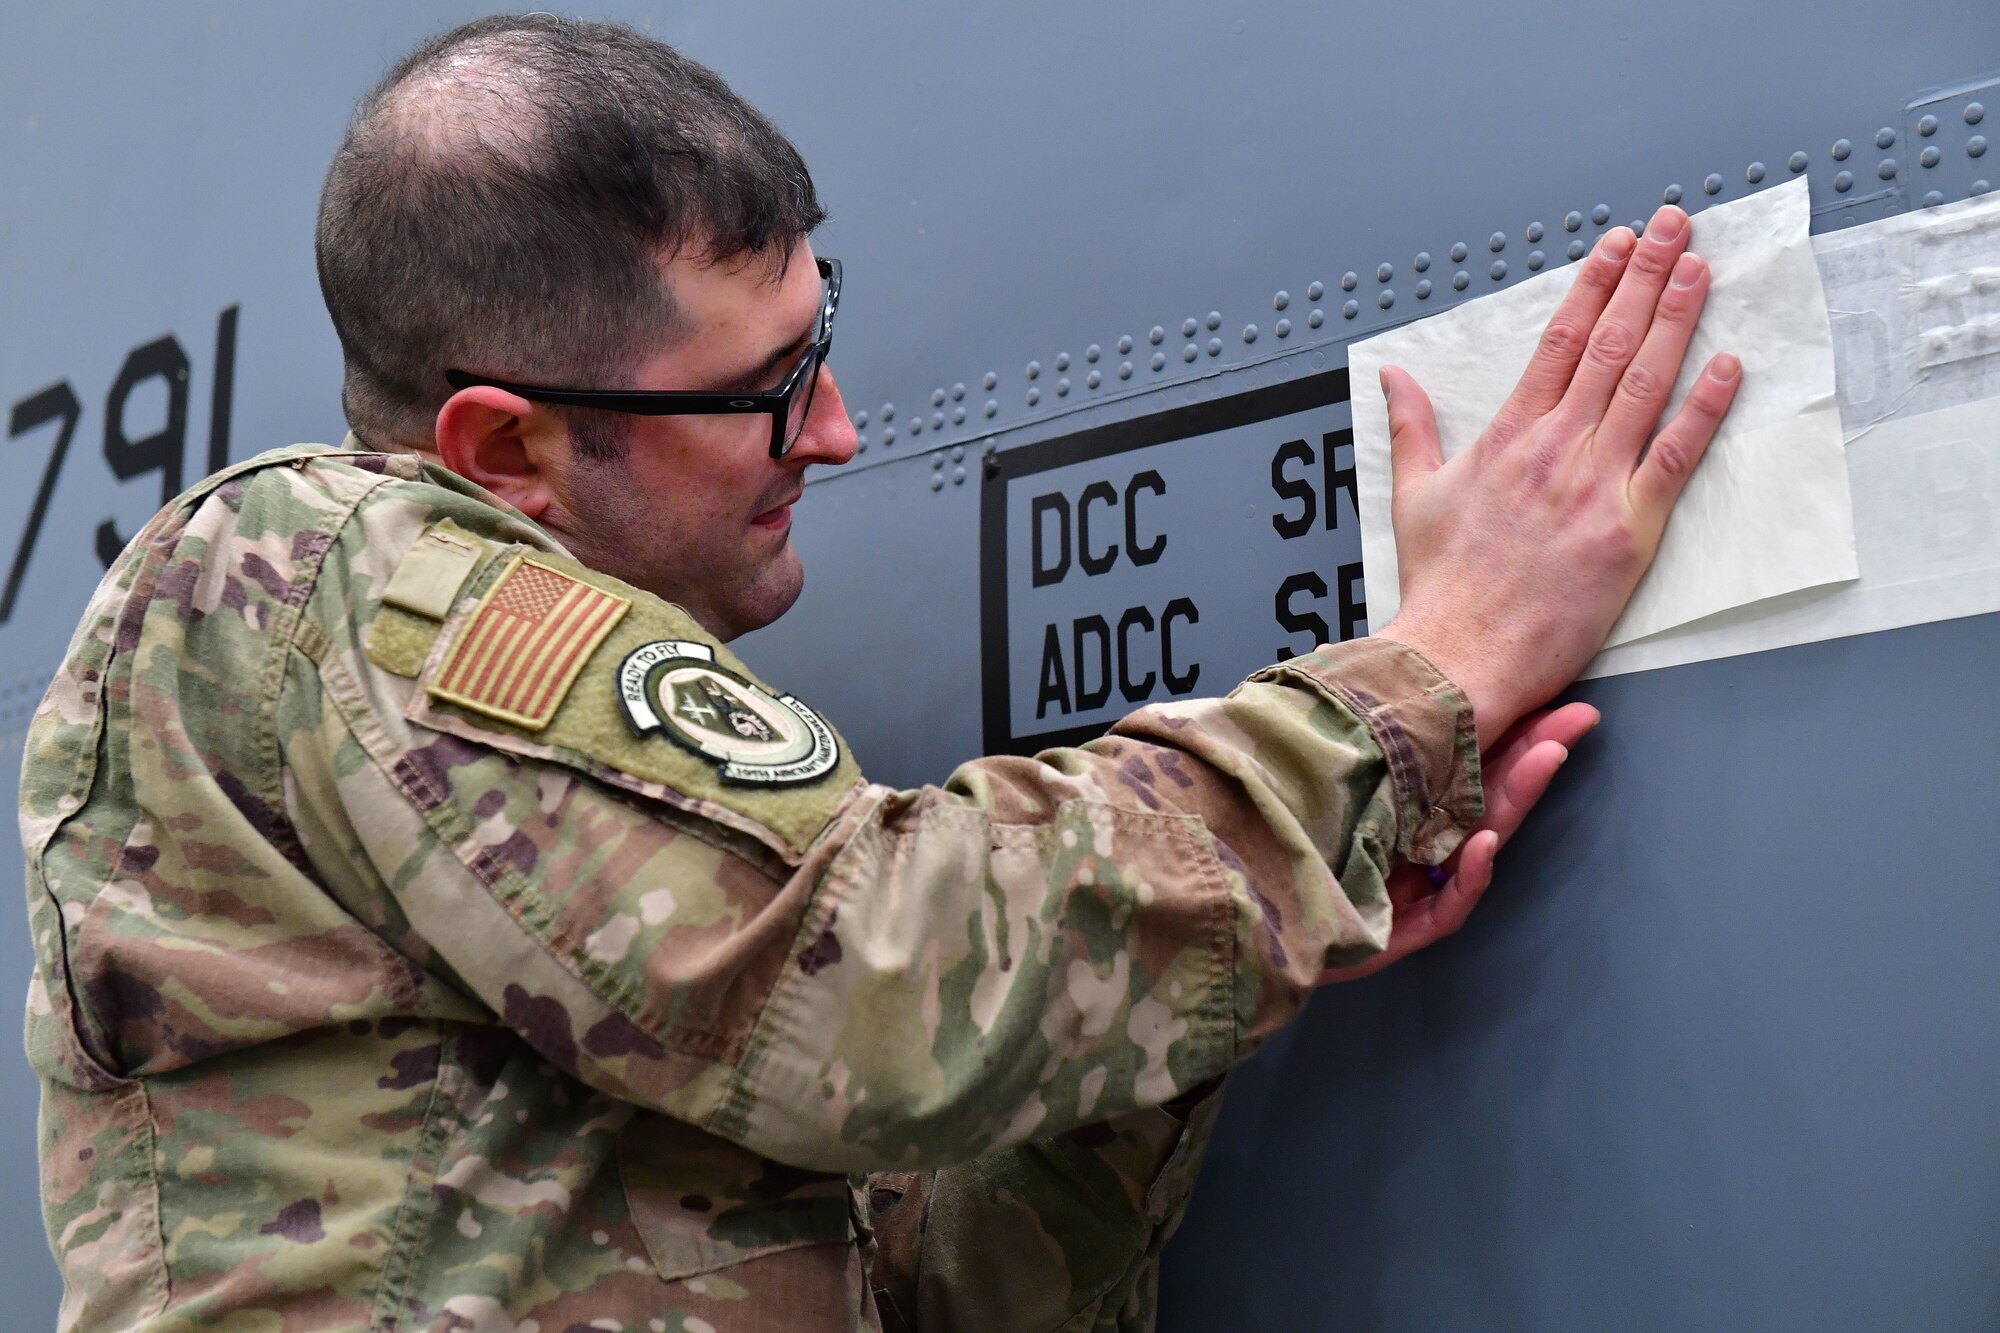 Senior Airman Kahlin Dawson, 19th Aircraft Maintenance Squadron crew chief, unveils his name on his assigned aircraft as part of the Dedicated Crew Chief program.